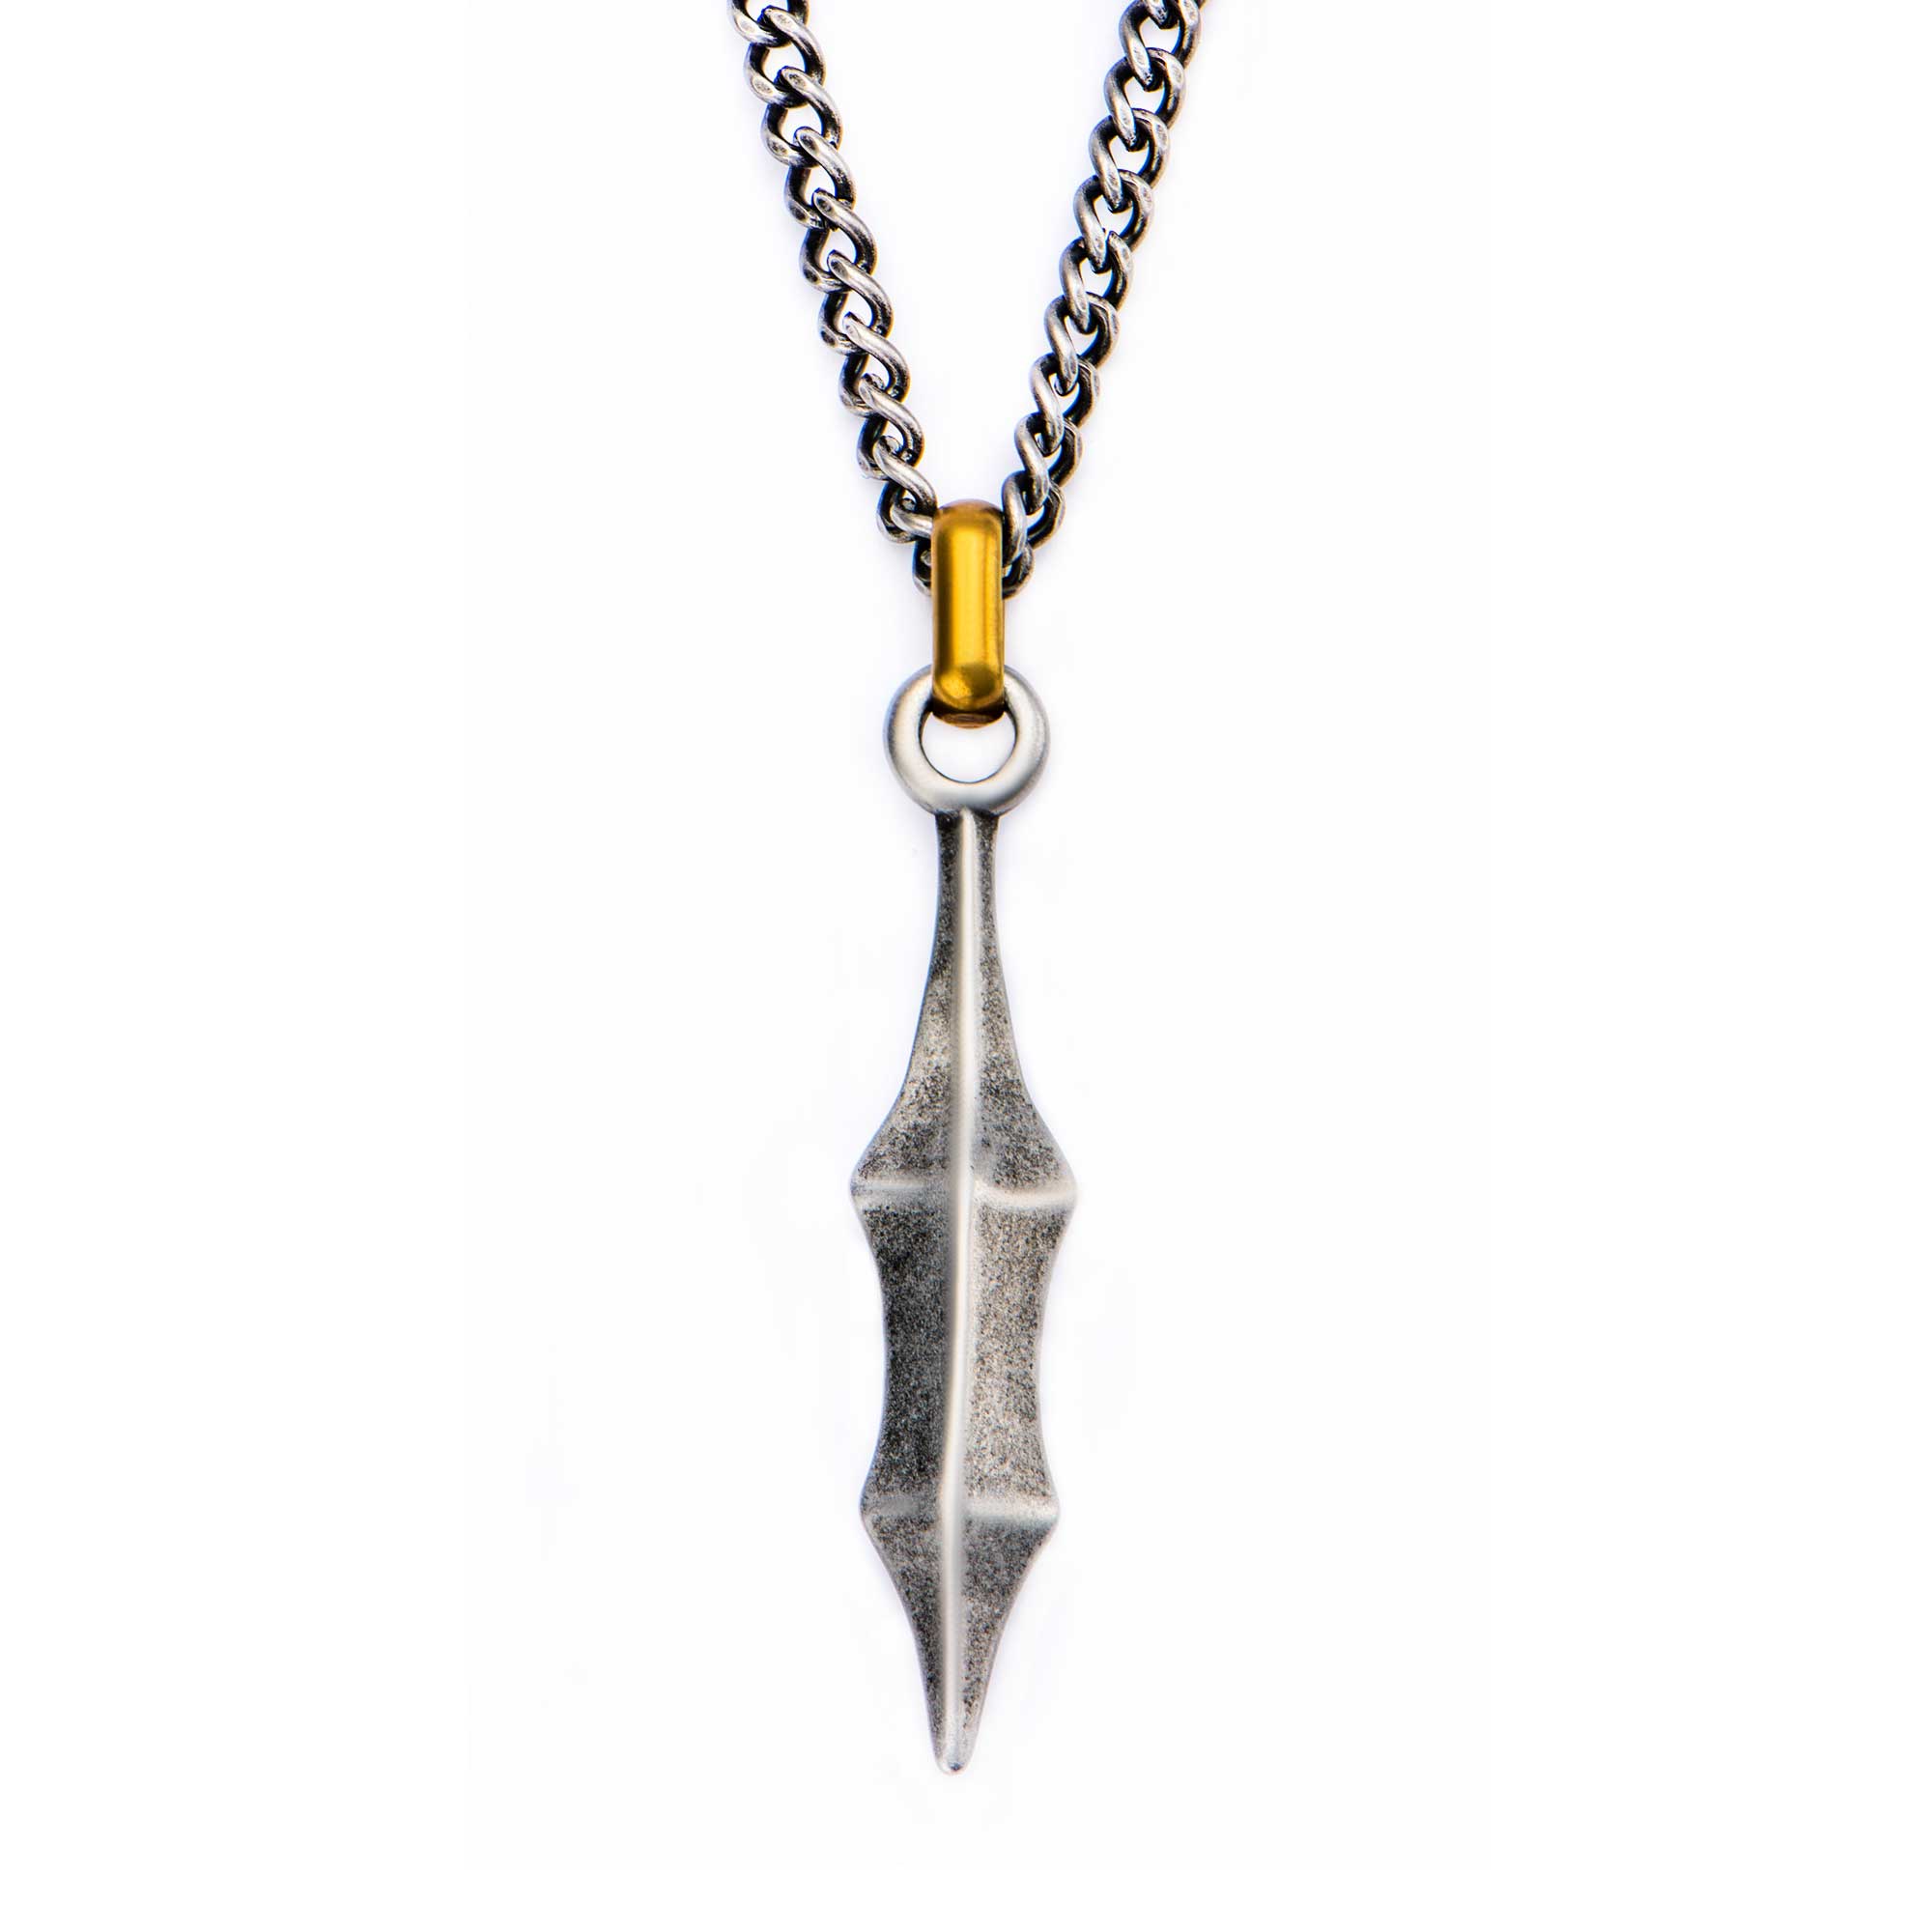 Antique Finish with an Antiqued Gold Plated Bail Medieval Blade Pendant Jayson Jewelers Cape Girardeau, MO